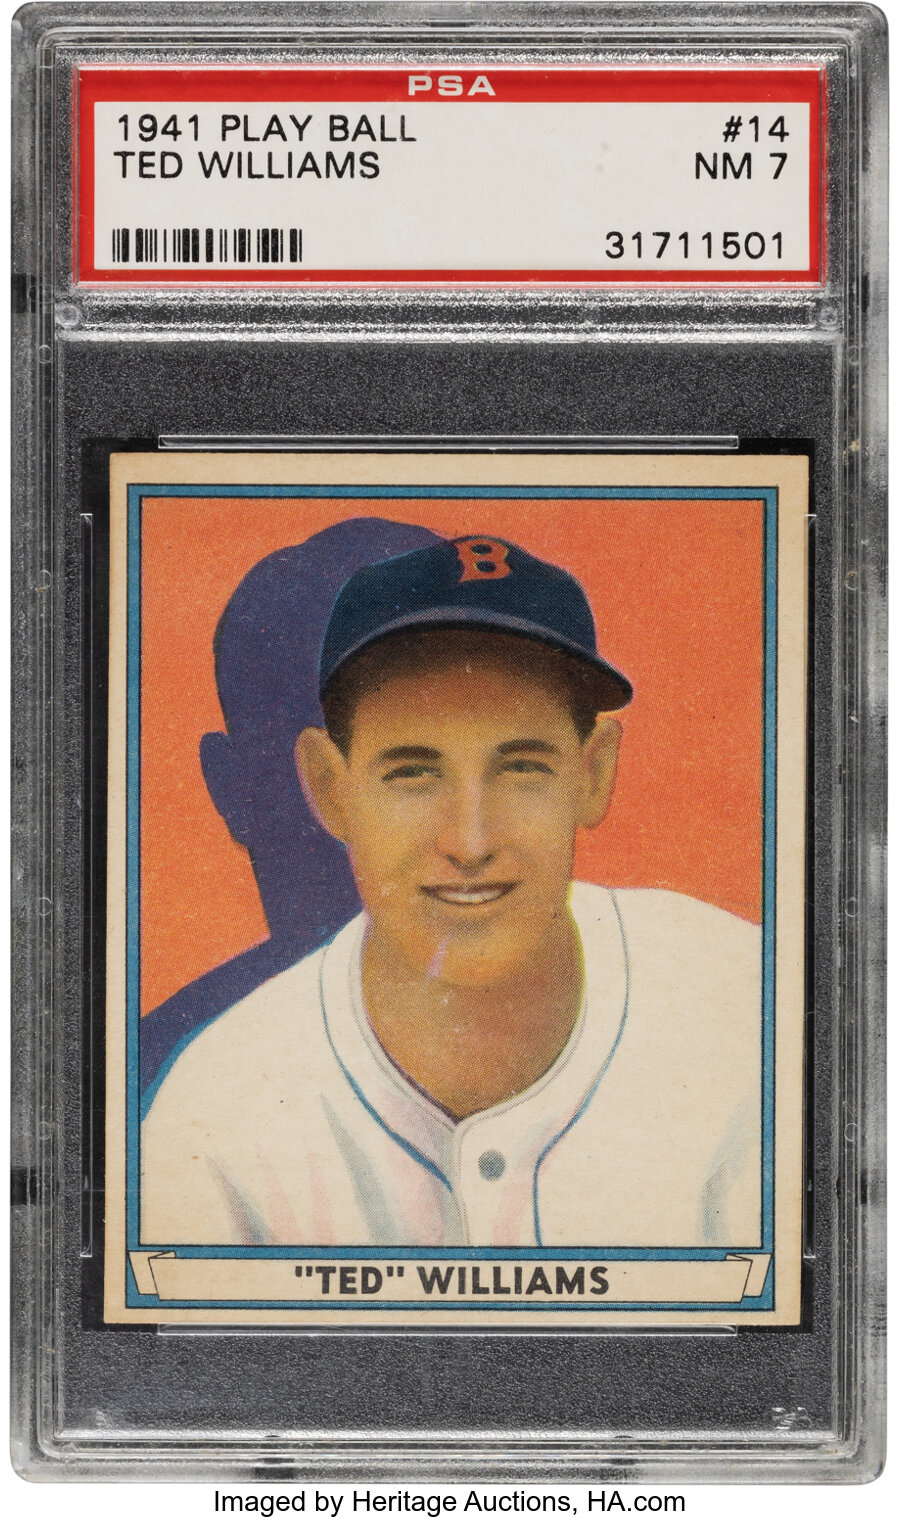 1941 Play Ball Ted Williams #14 PSA NM 7